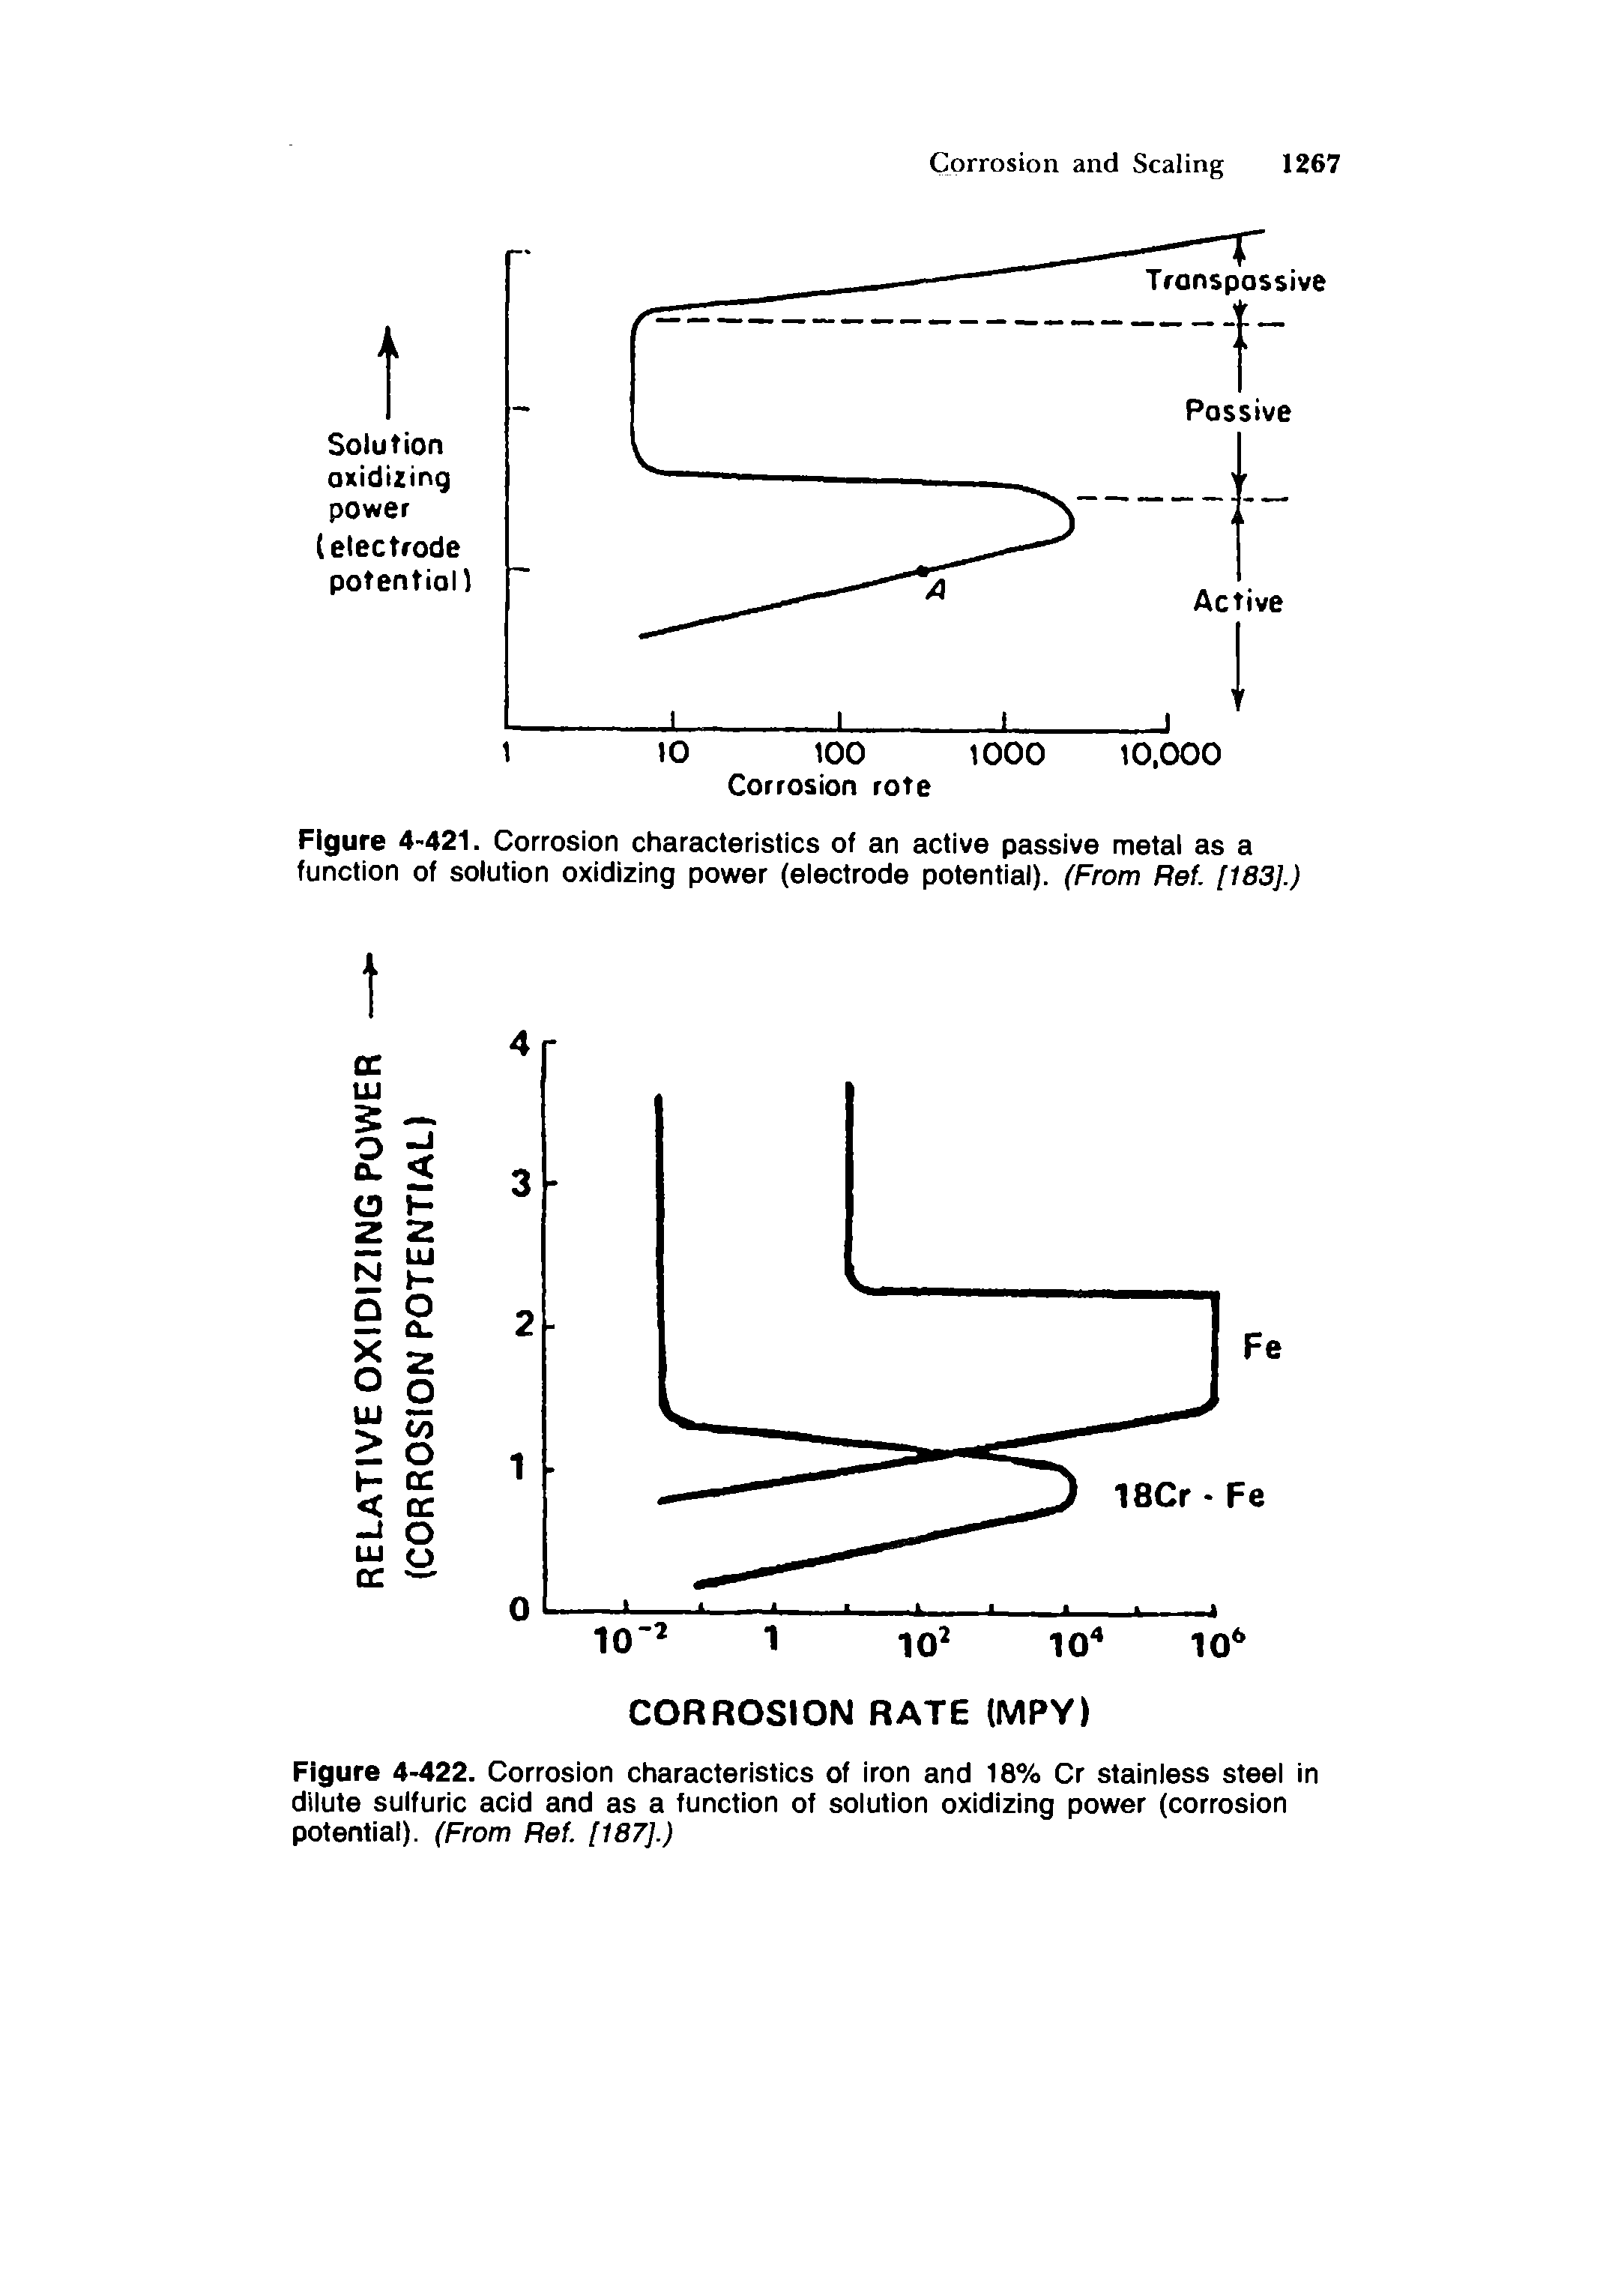 Figure 4-421. Corrosion characteristics of an active passive metal as a function of solution oxidizing power (eiectrode potential). (From Ref. [183].)...